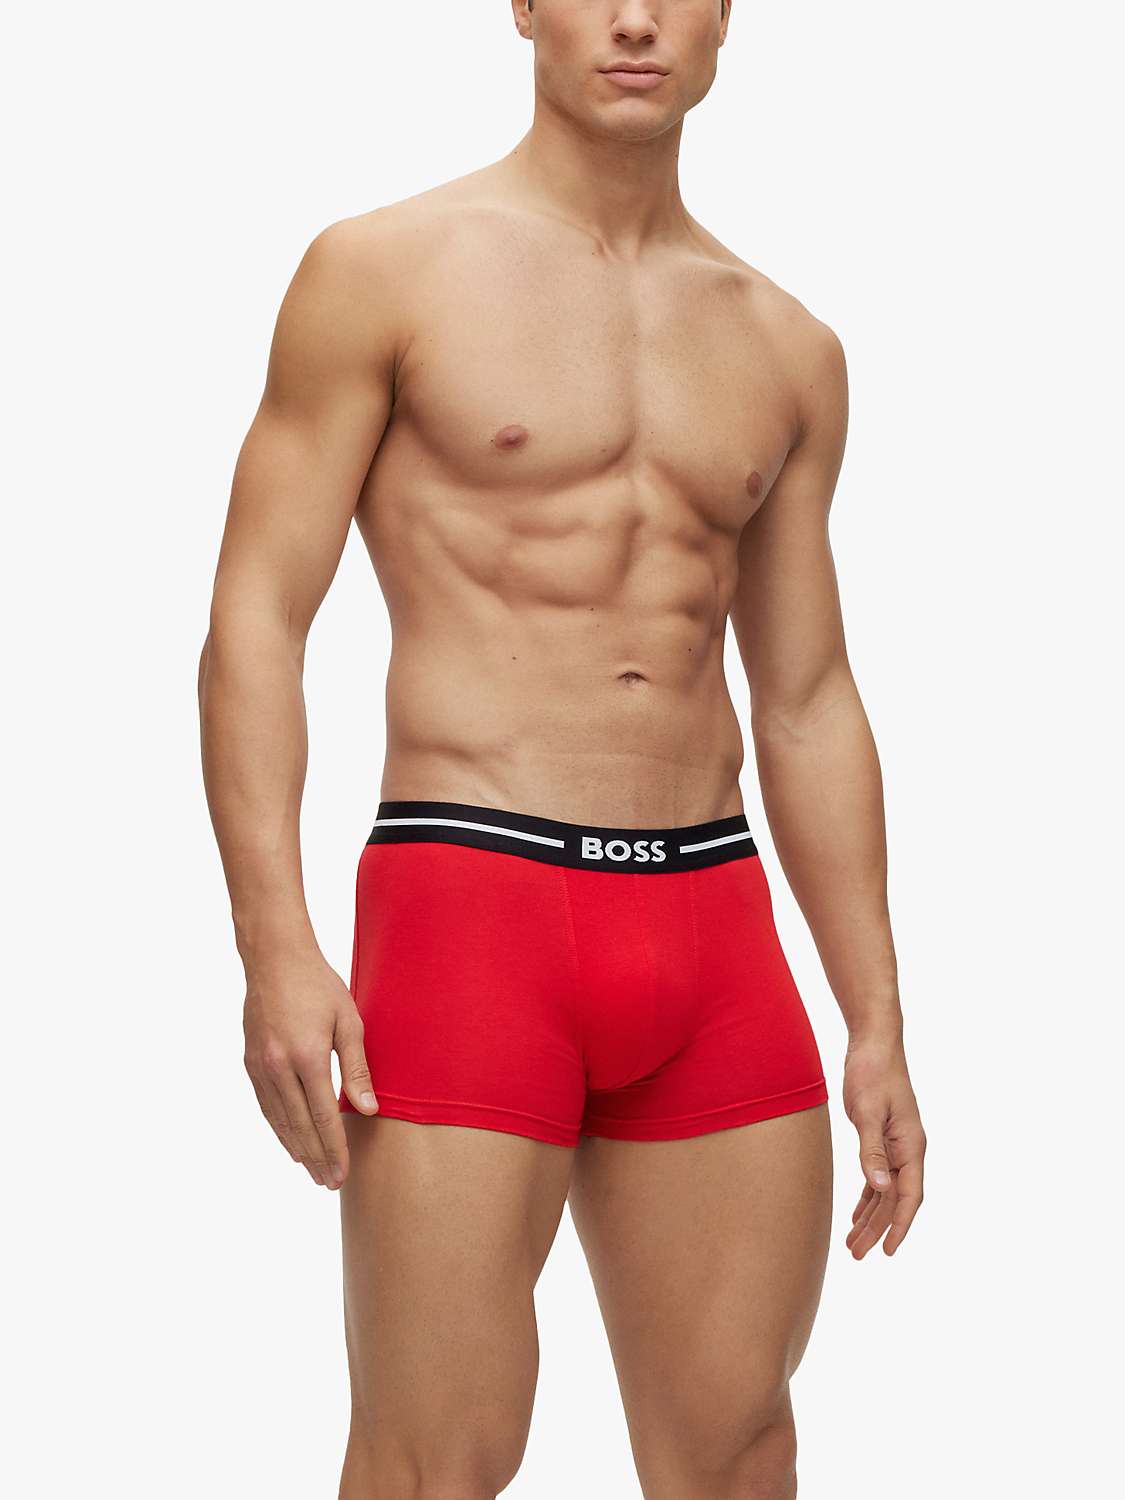 Buy BOSS Bold Design Stretch Cotton Trunks, Pack of 3, Red/Blue/Multi Online at johnlewis.com